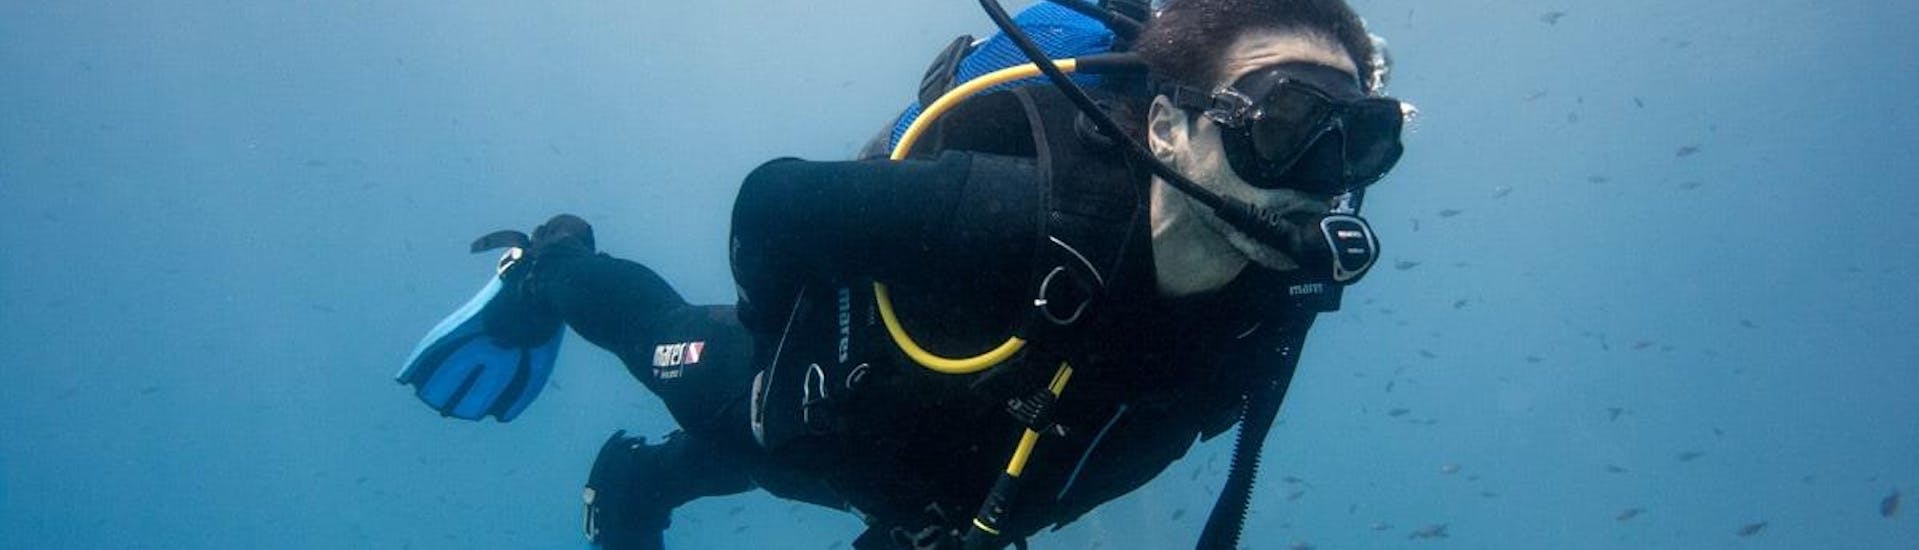 A scuba diver during the SSI Try Scuba for Beginners in Elba with Aquanautic Elba.